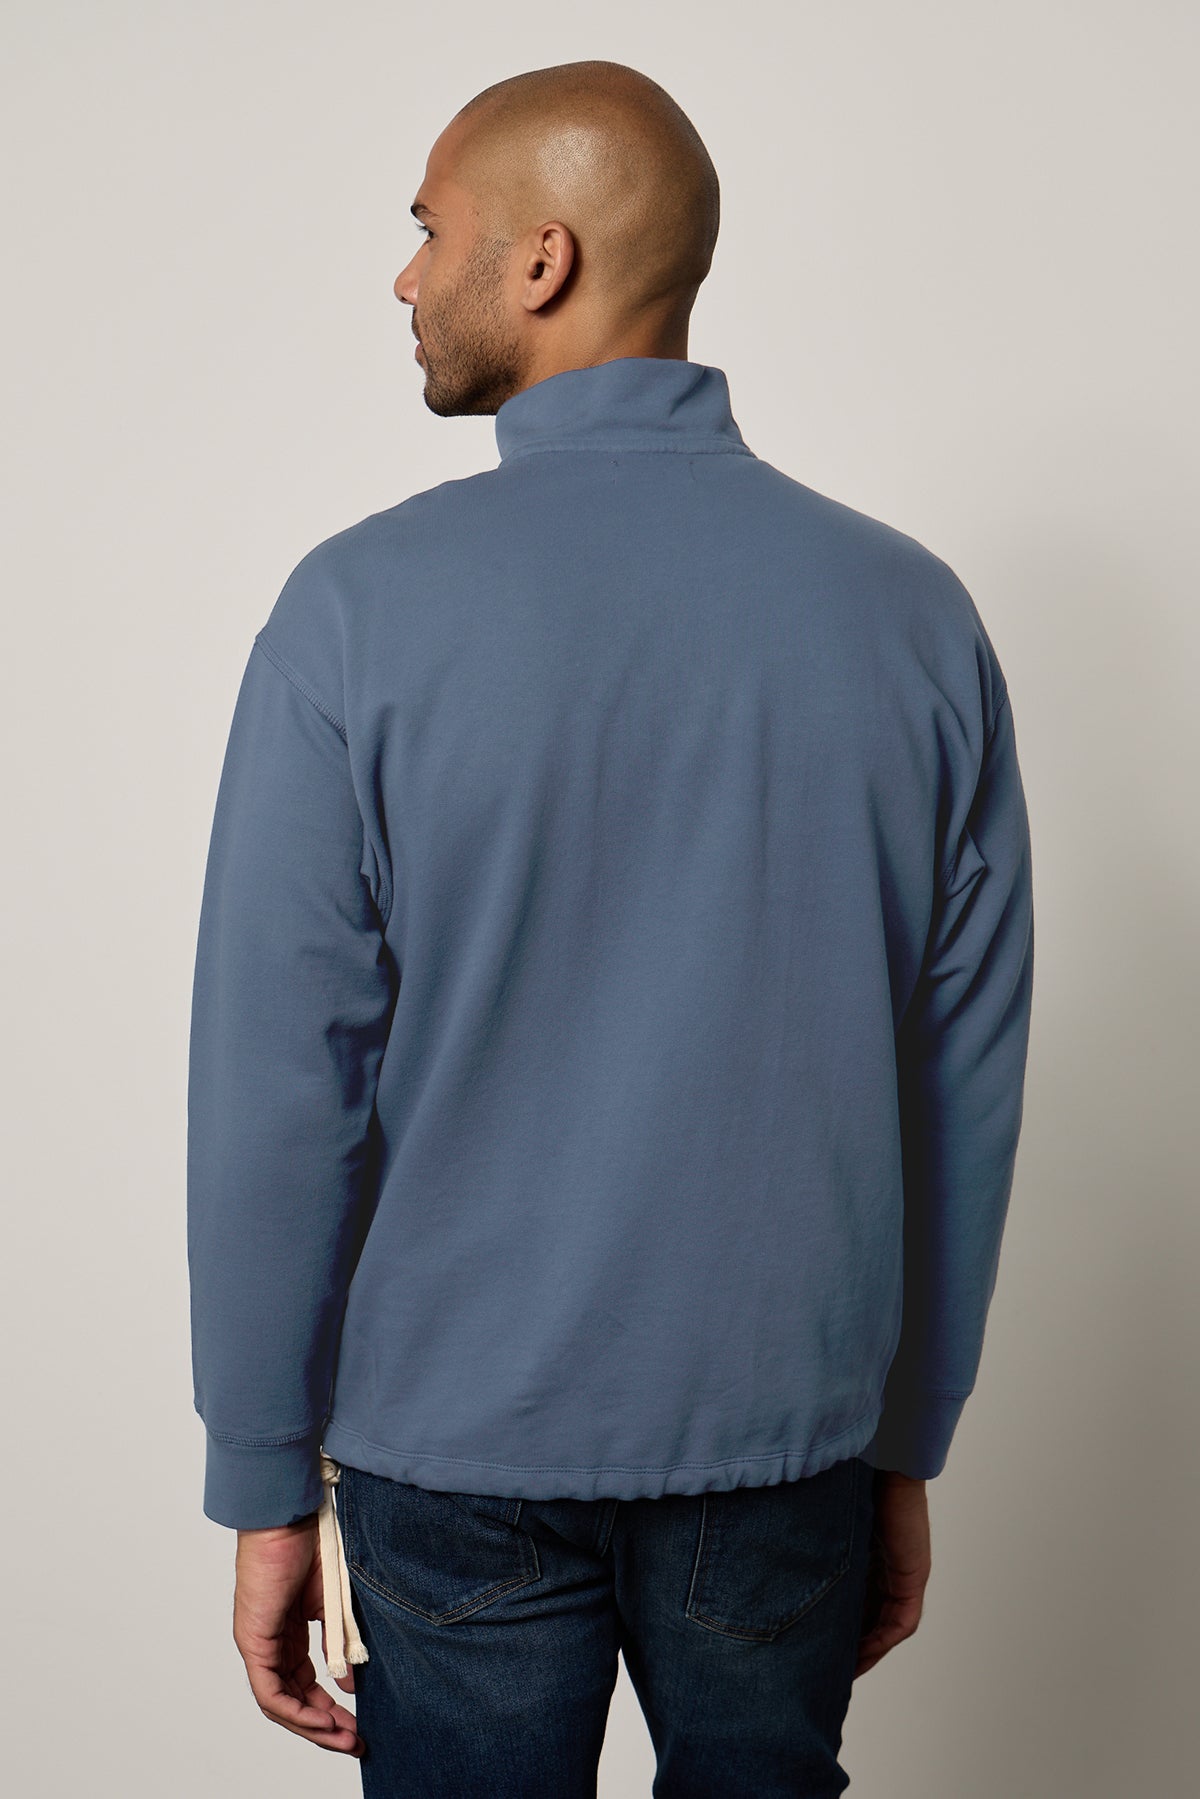 The back view of a man wearing a Velvet by Graham & Spencer Patrick quarter-zip sweatshirt.-26207907840193